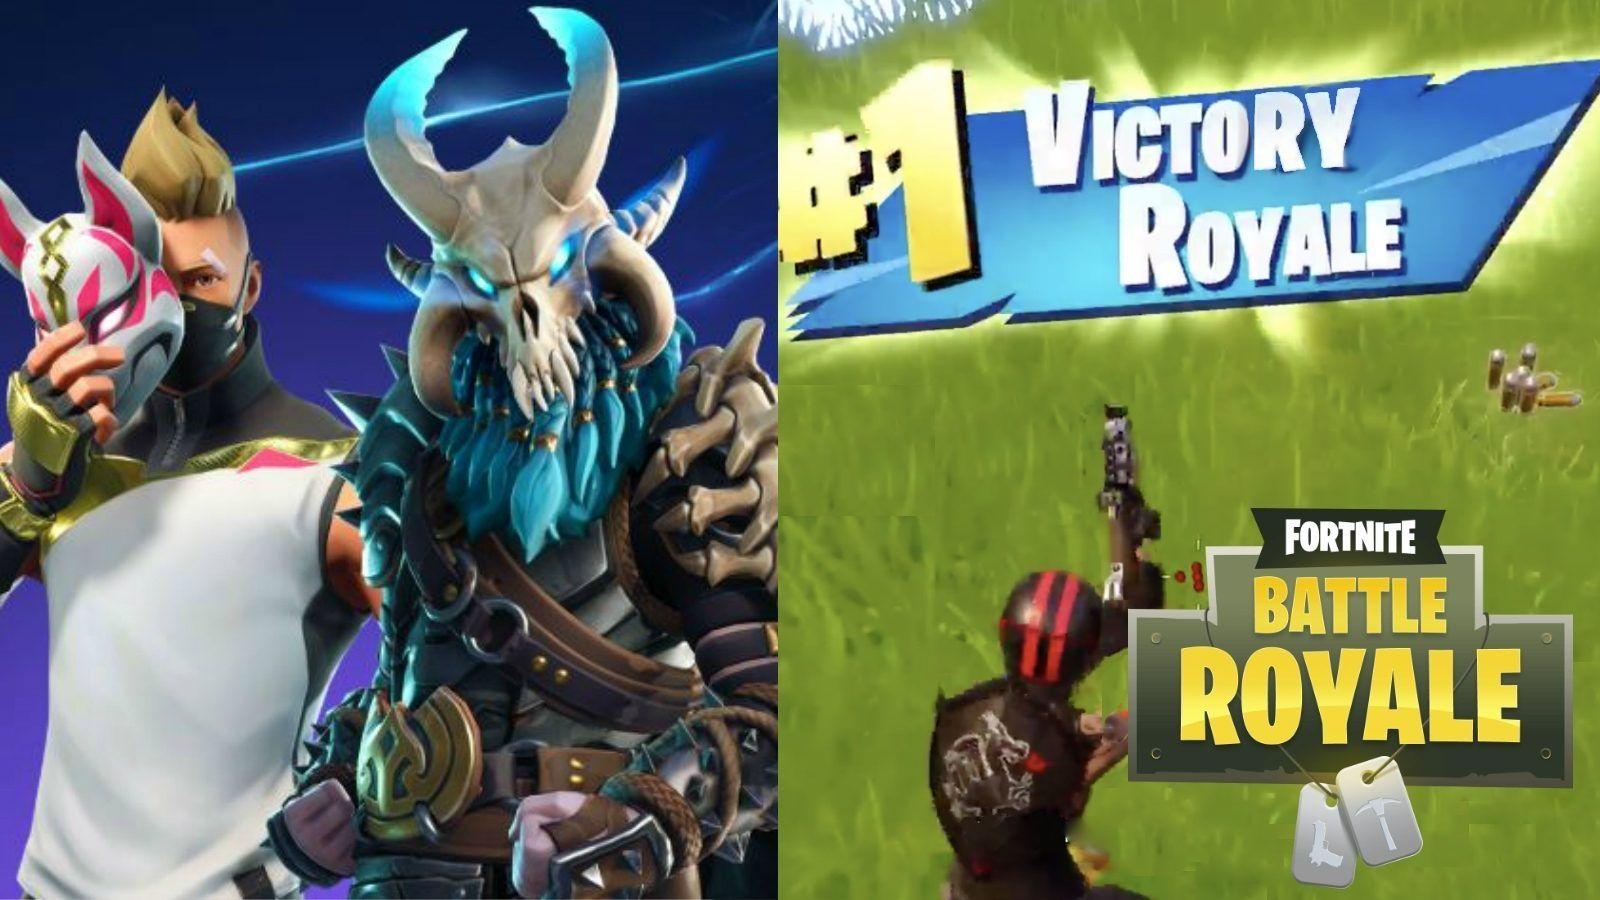 Fortnite Victory Royale Logo - Brand New Fortnite Victory Royale Screen And Slow Mo Animation